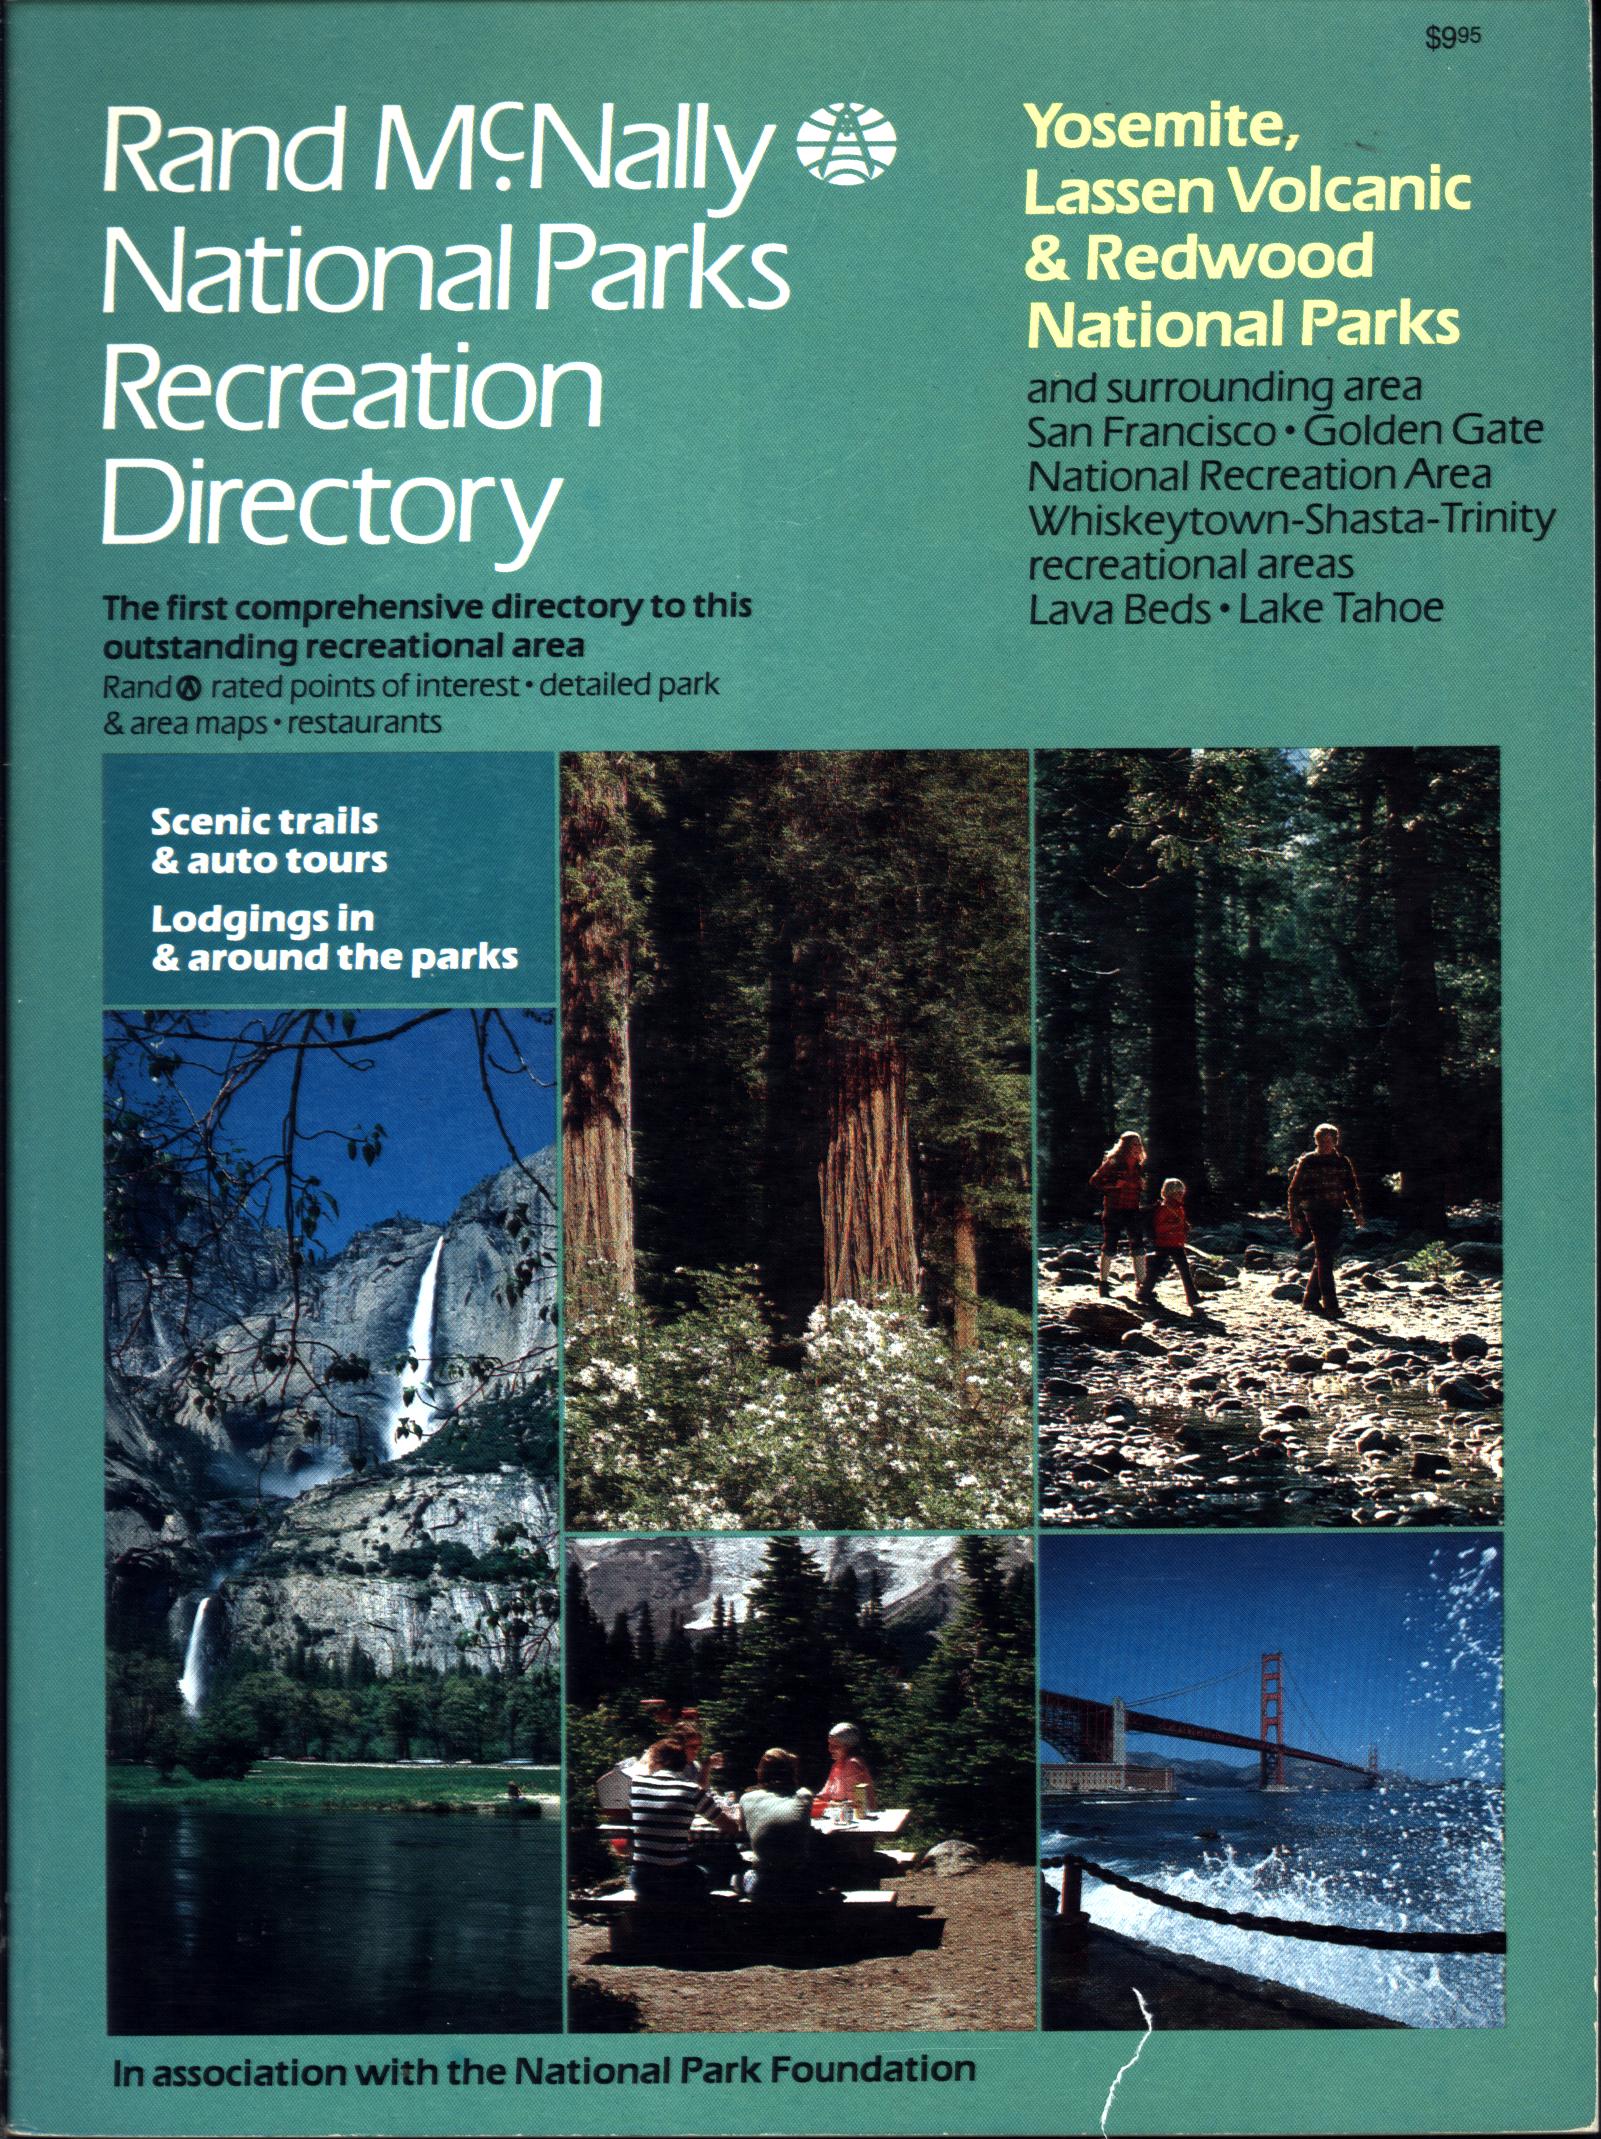 YOSEMITE, LASSEN VOLCANIC & REDWOOD NATIONAL PARKS and surrouhnding area